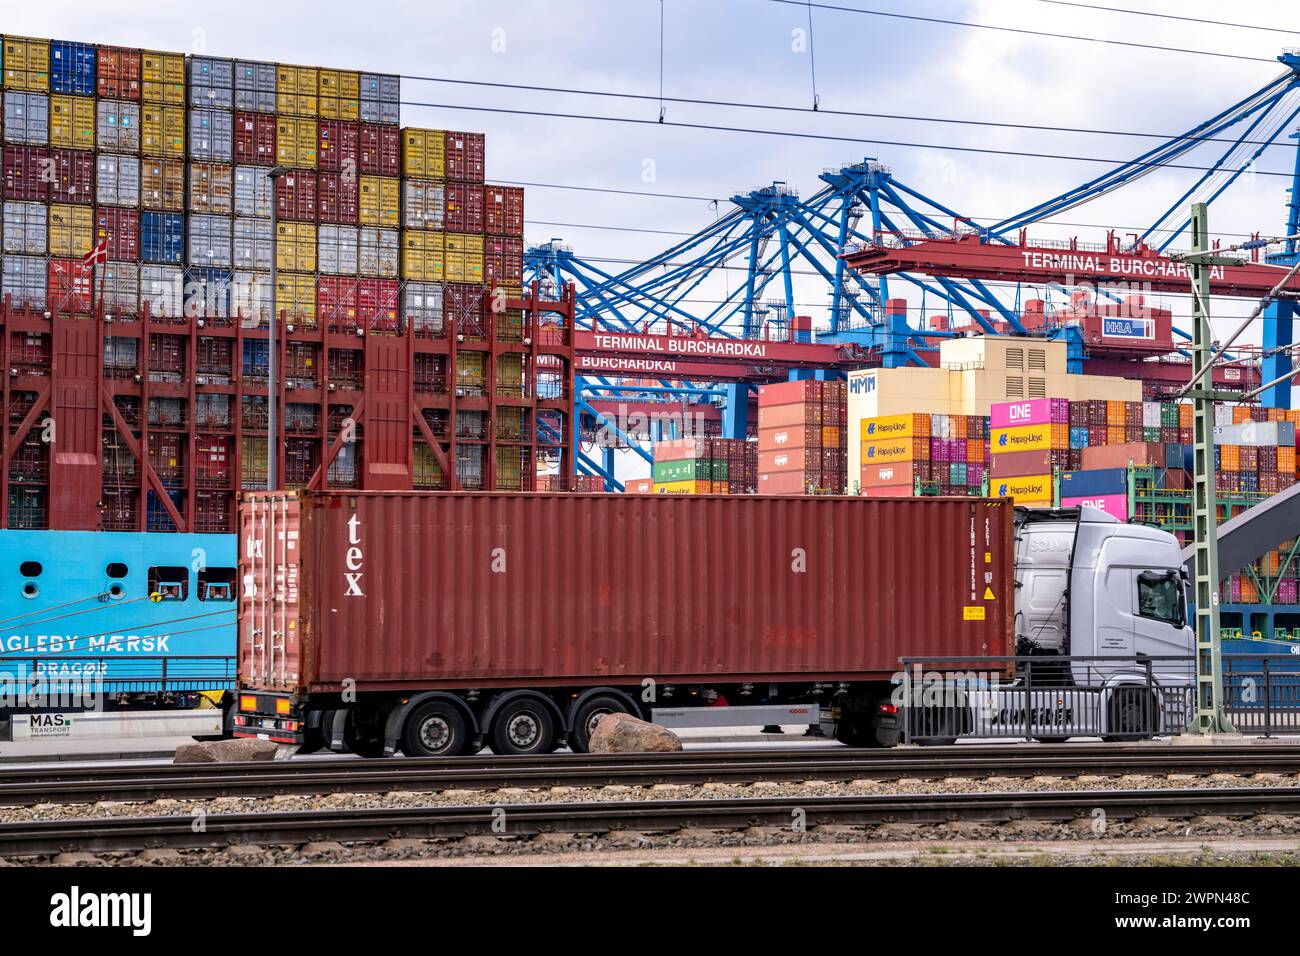 Port of Hamburg, Waltershofer Hafen, container ships, trucks bring and collect freight containers to and from HHLA Container Terminal Burchardkai, Ham Stock Photo